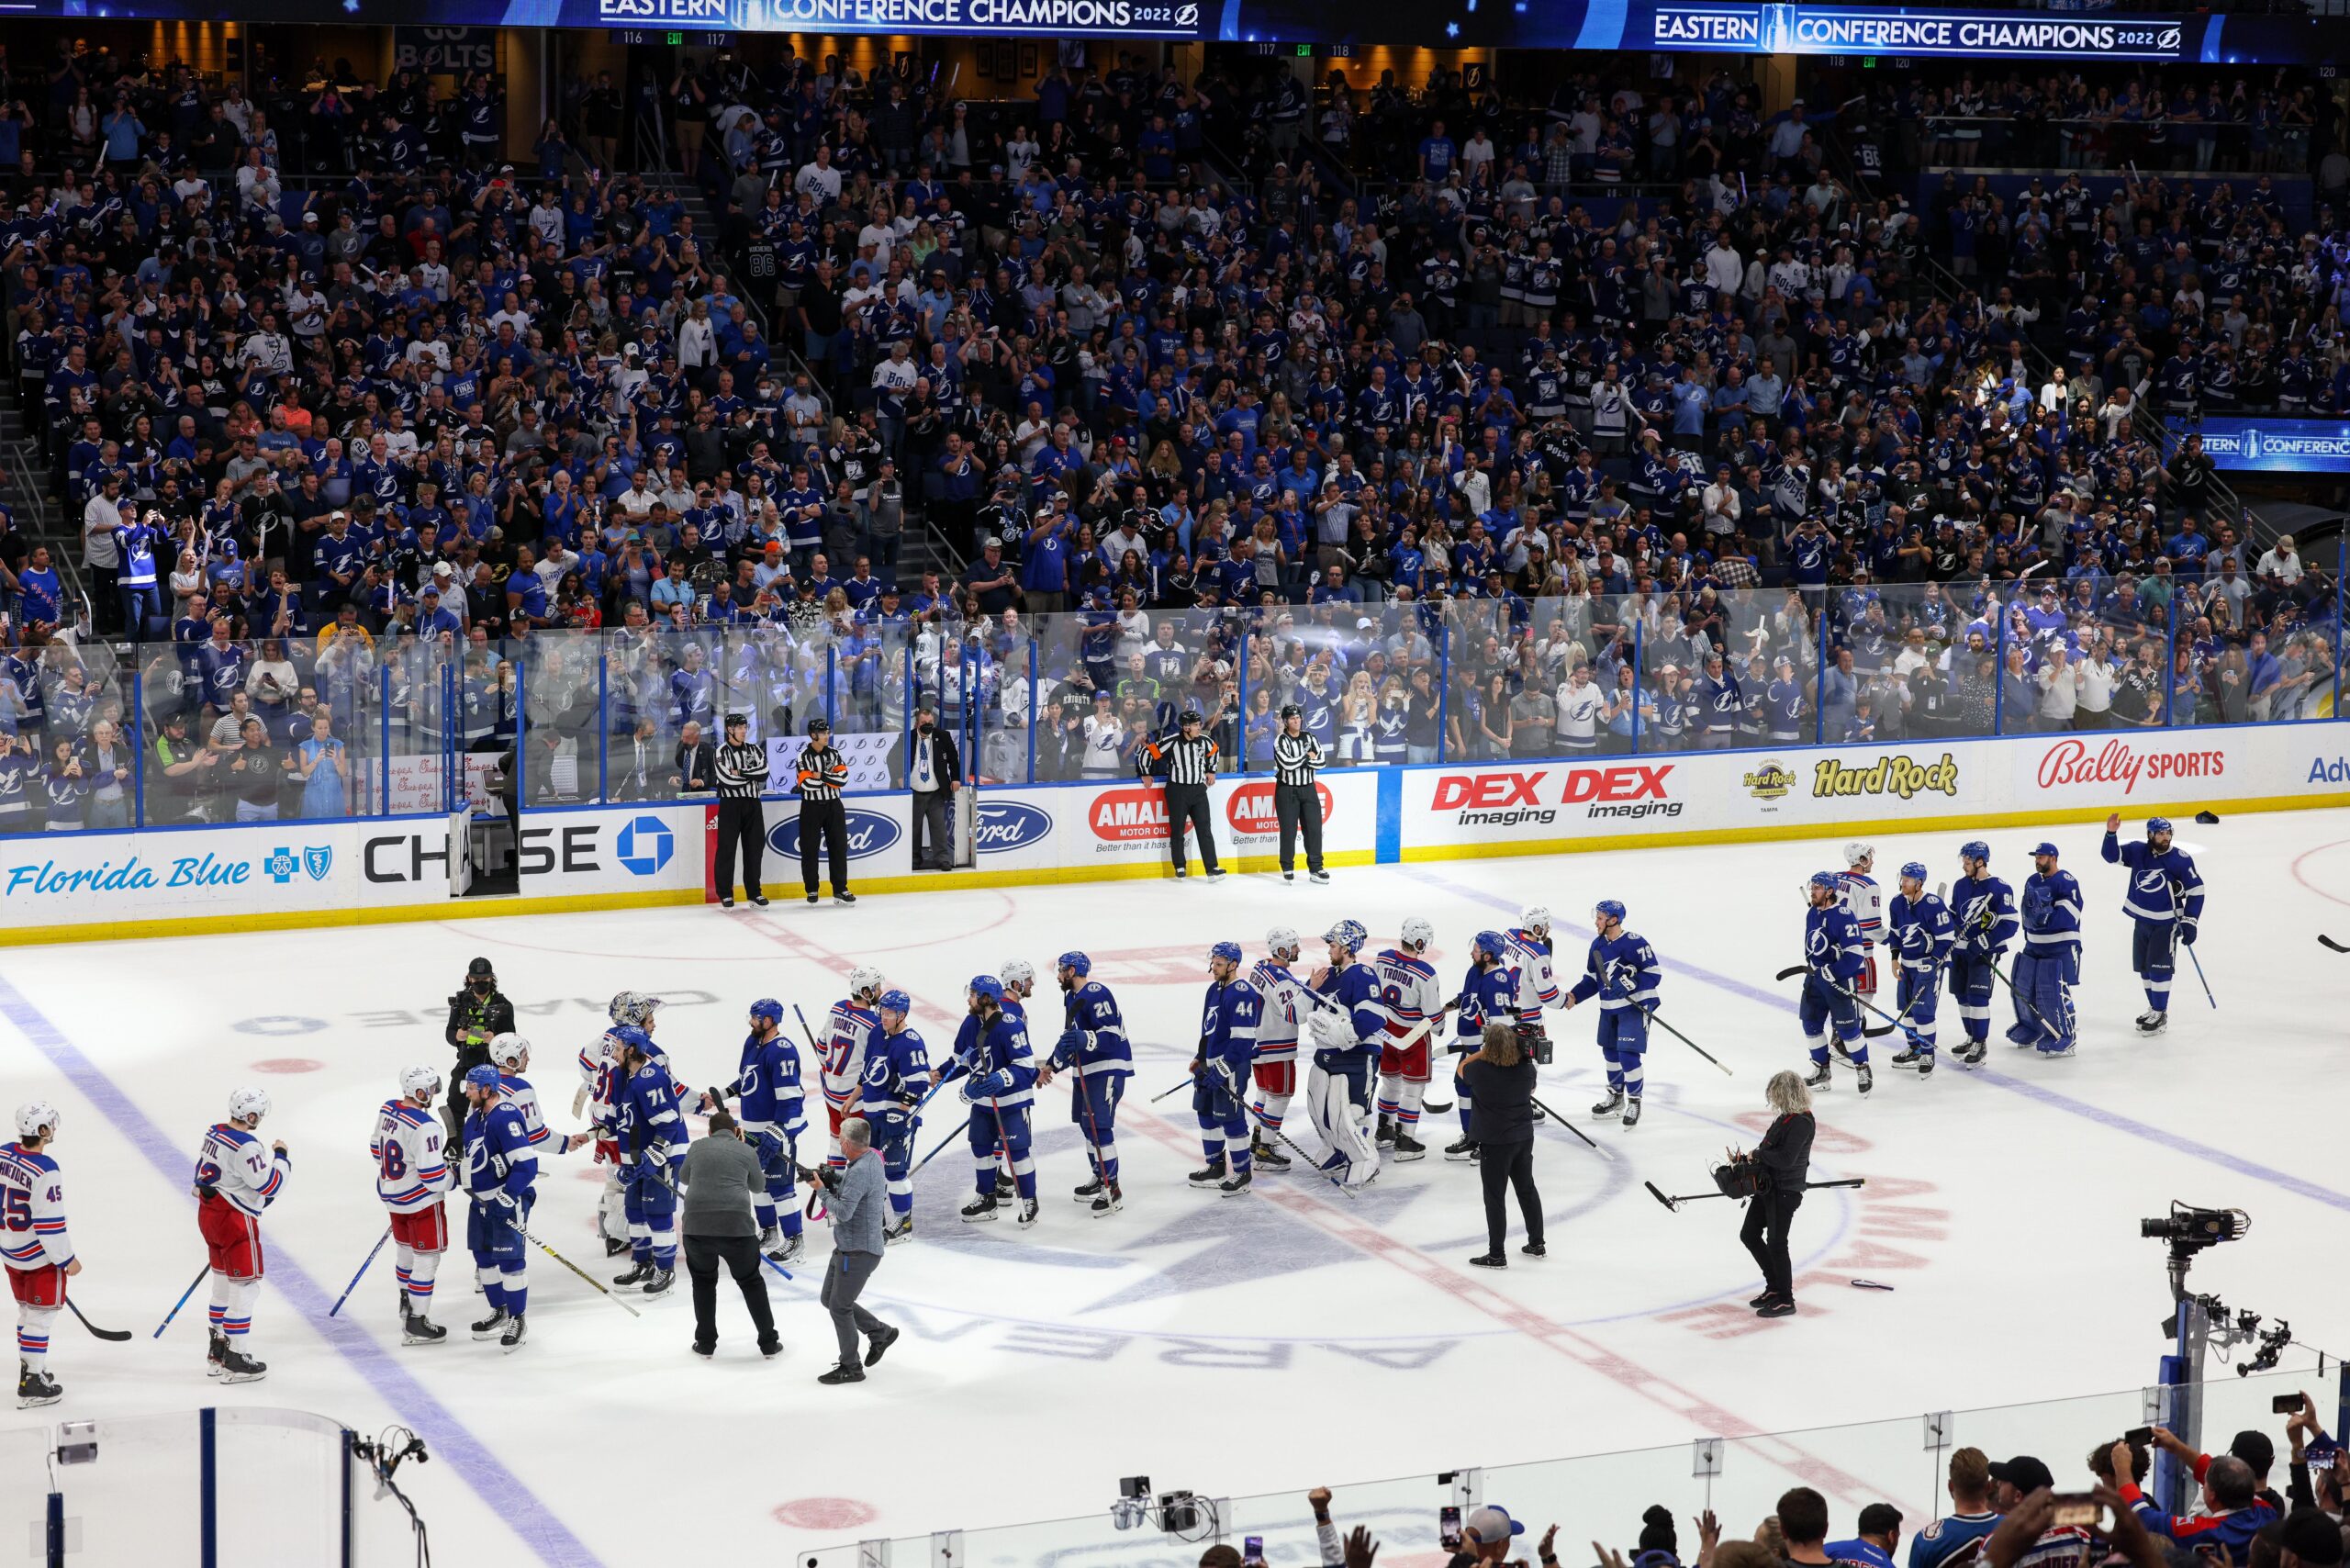 NY Rangers face elimination, but that's when they play best